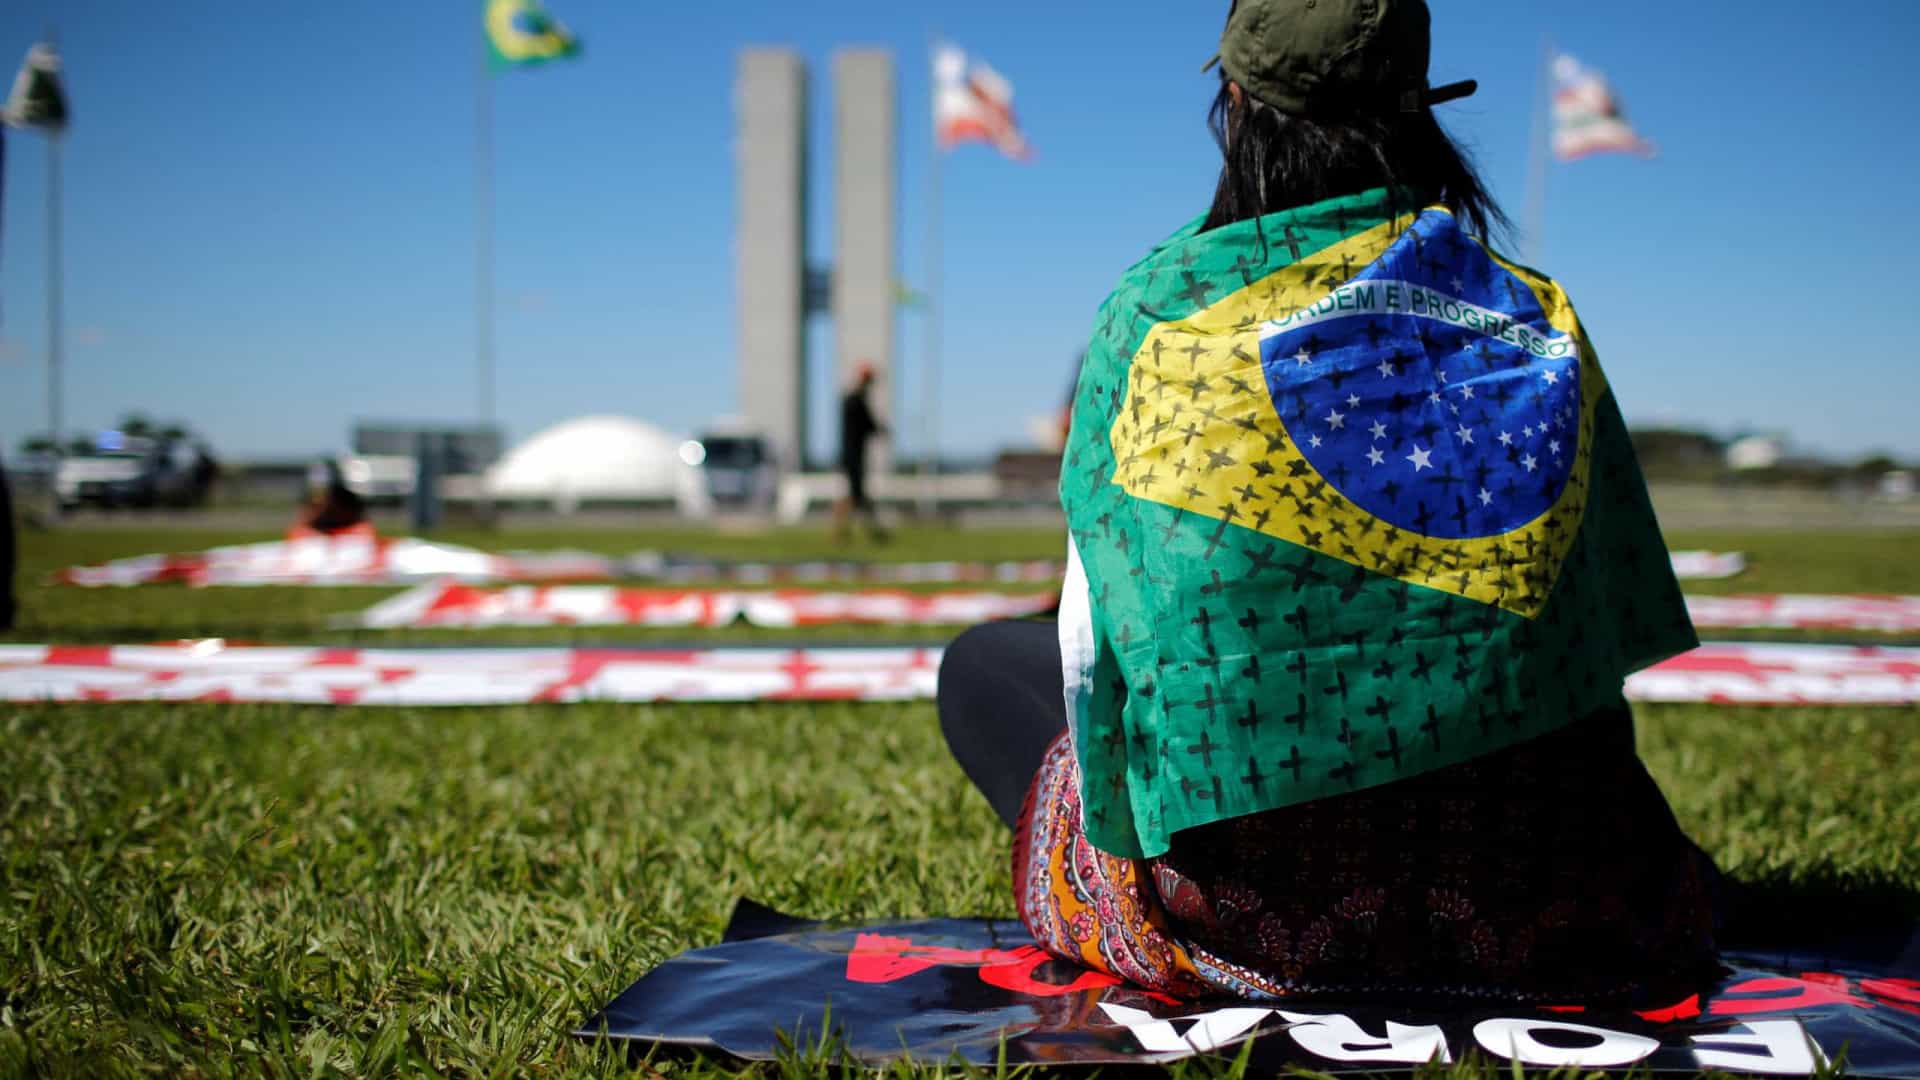 According to the 2020 Social Progress Index, Brazil is the 61st best country in the world to live in, behind South American countries like Chile (34th), Uruguay (38th), Argentina (41st) and Peru (59th).